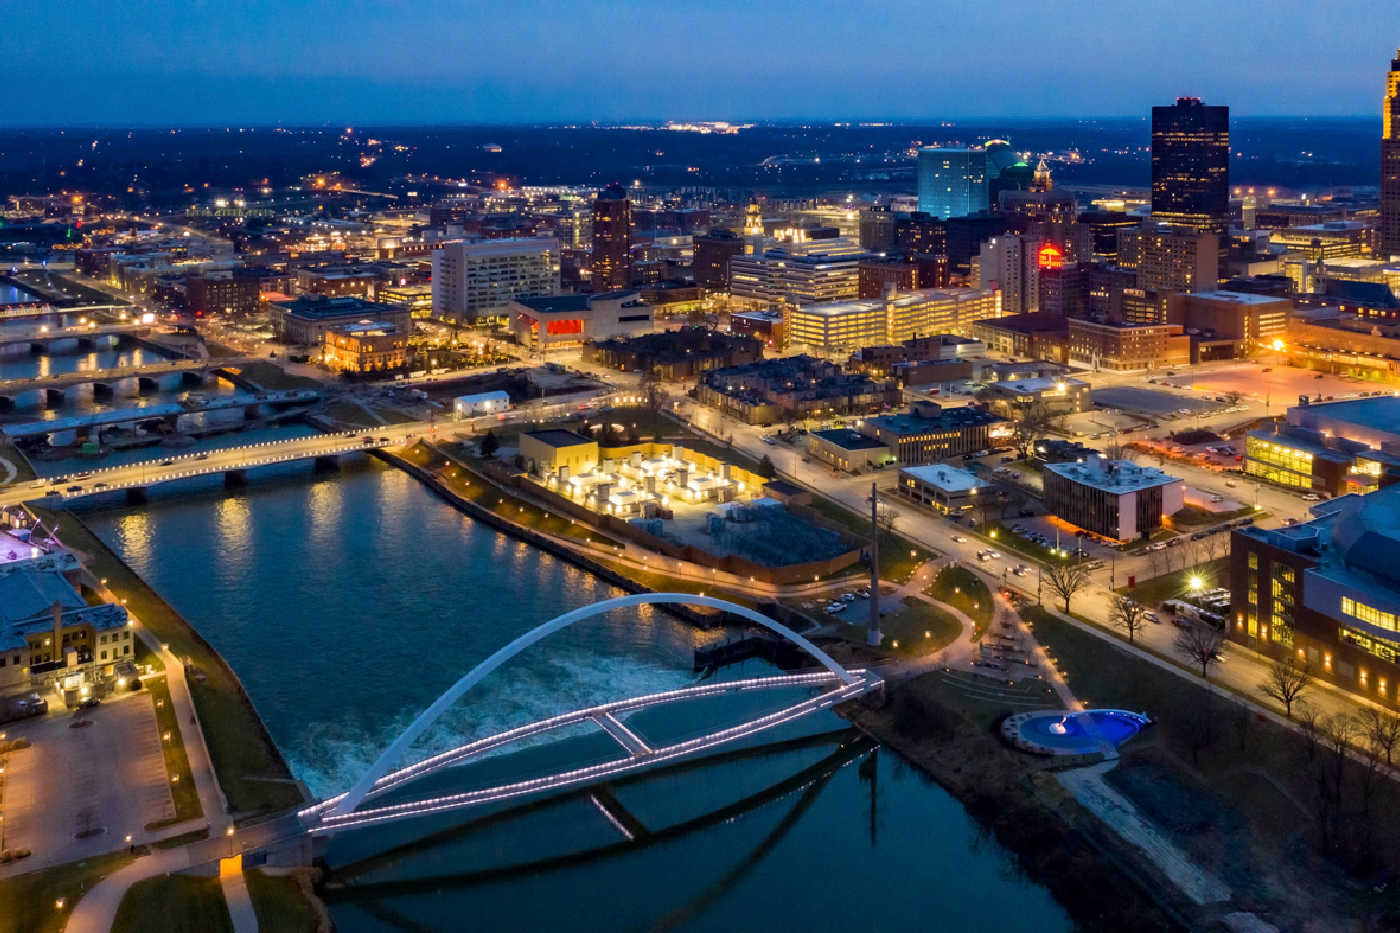 18 THINGS TO DO IN DES MOINES EVERYONE WILL LOVE